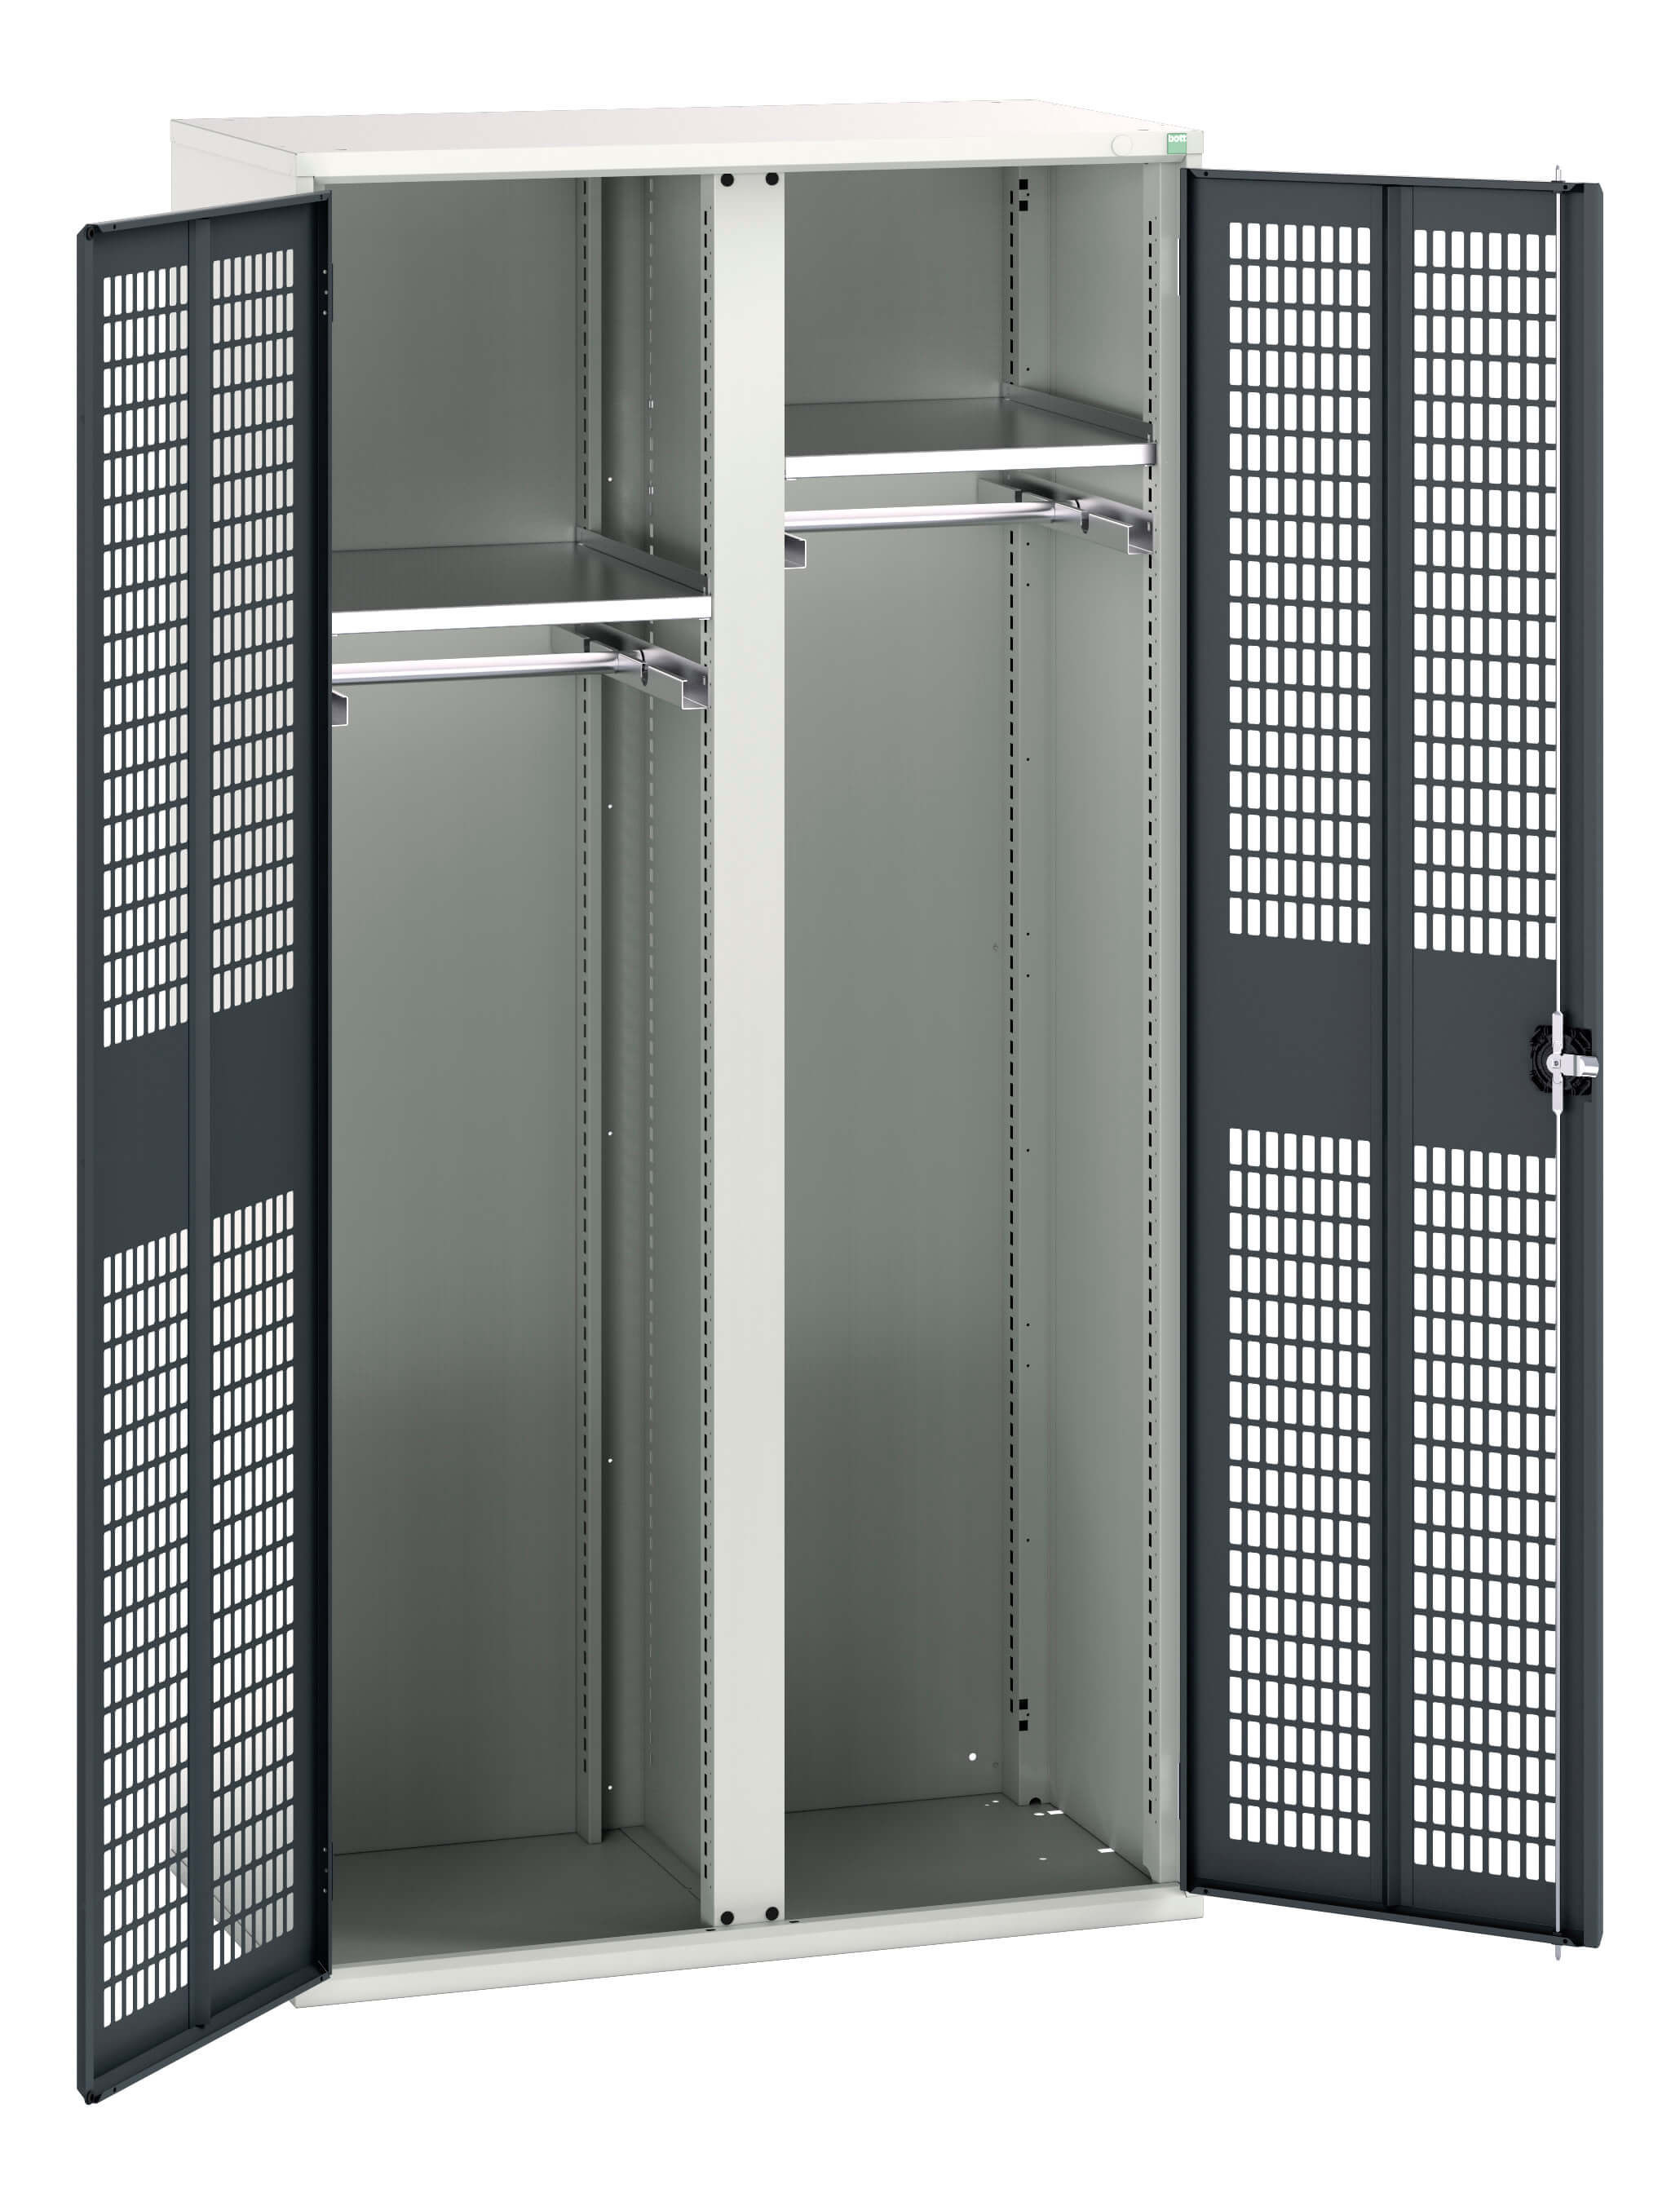 Bott Verso Ventilated Door Ppe / Janitorial Kitted Cupboard With Vertical Partition - 16926773.19